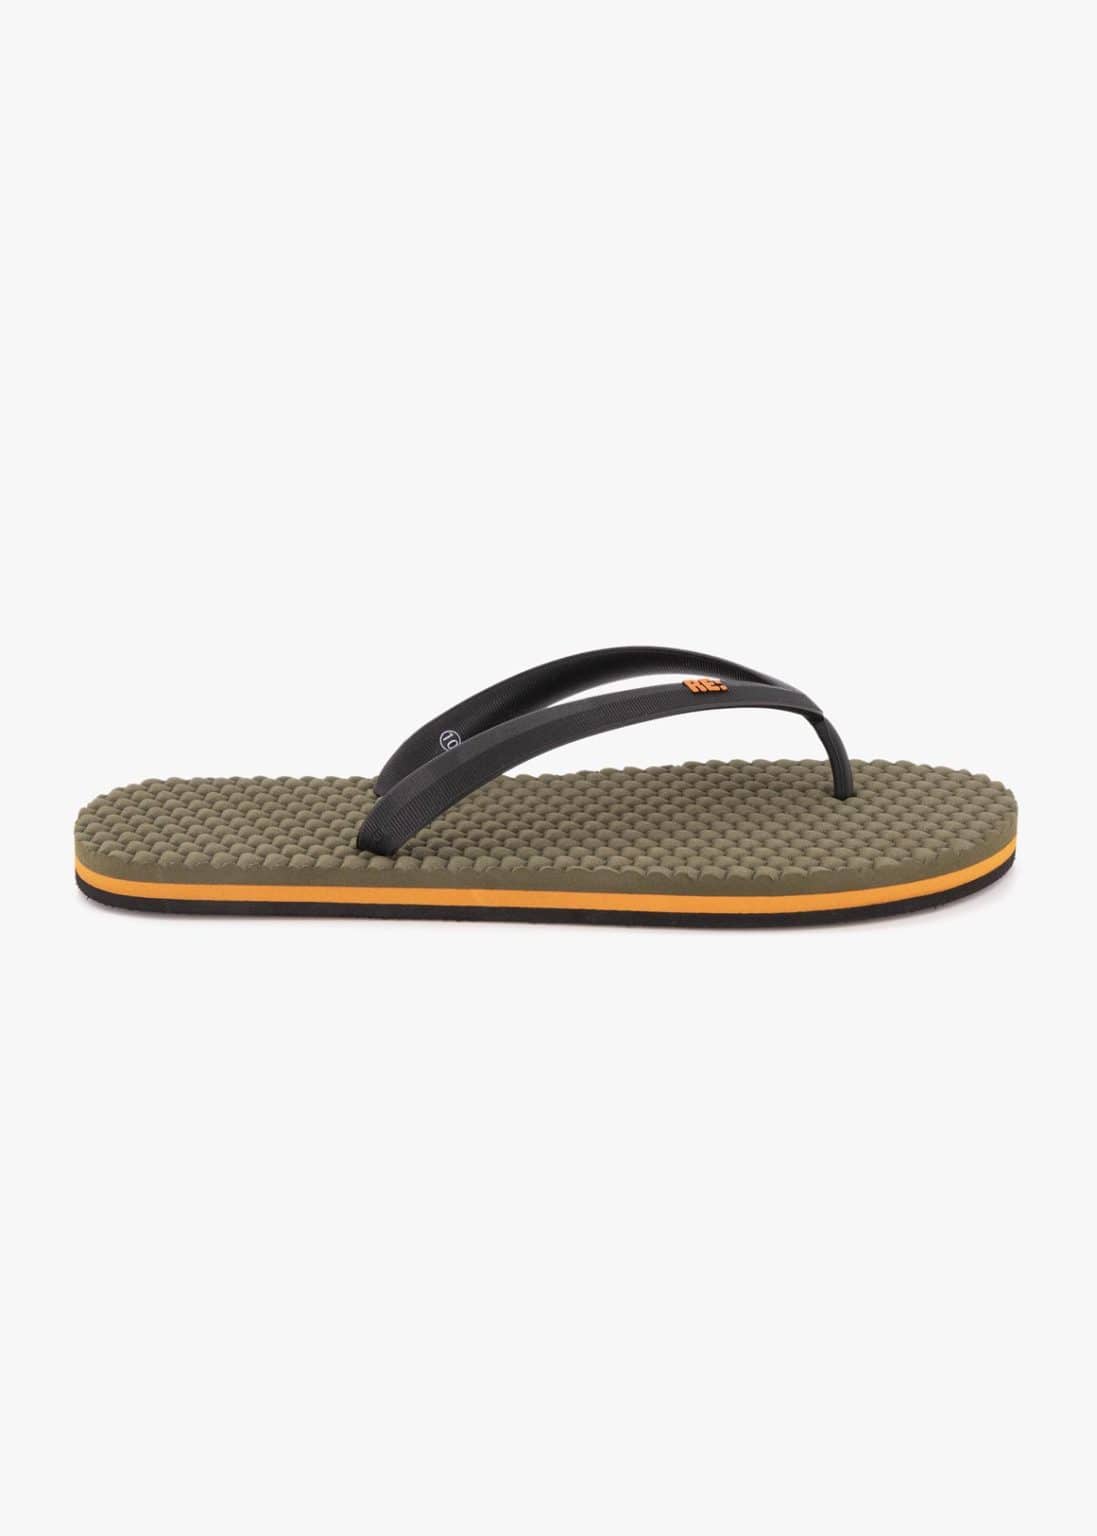 RE RIBBED FLIP FLOP - Woolworths Mauritius Online